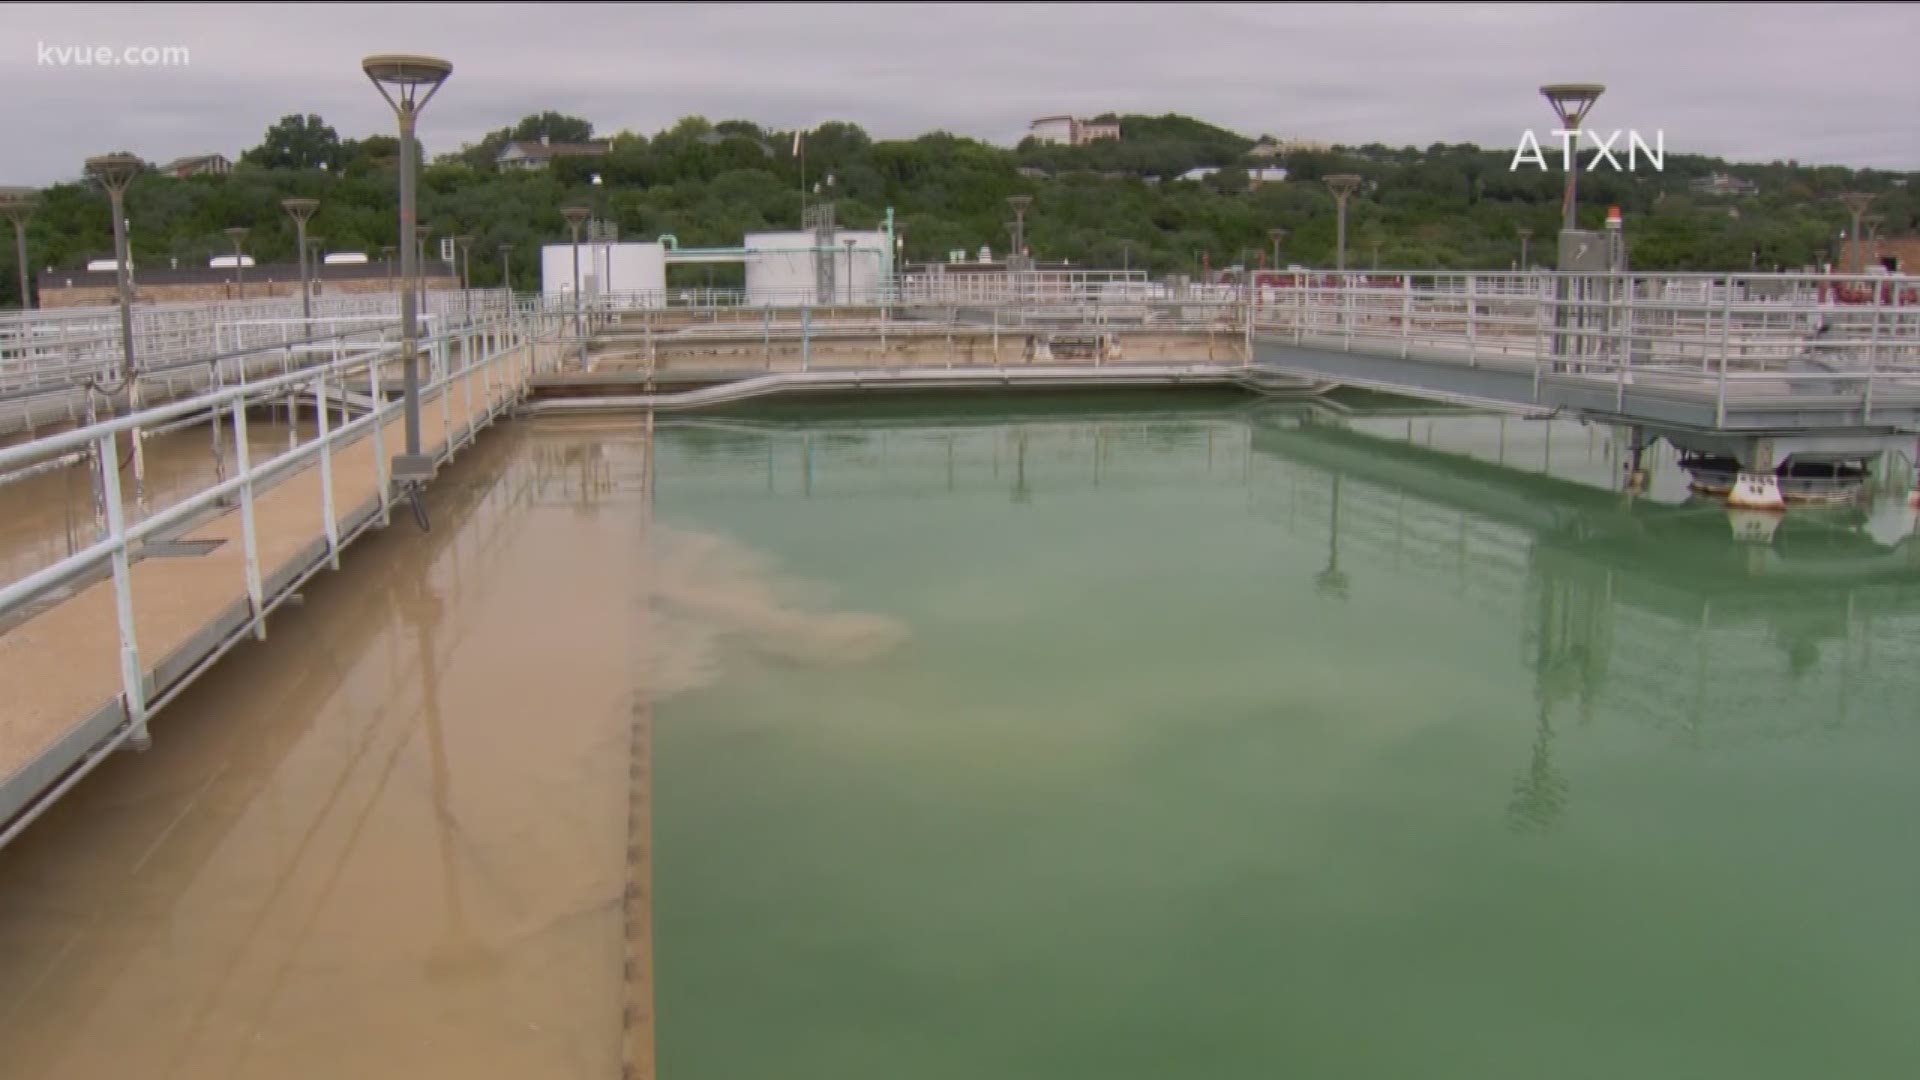 A new report is coming clean about the dirty water in Austin one year ago.